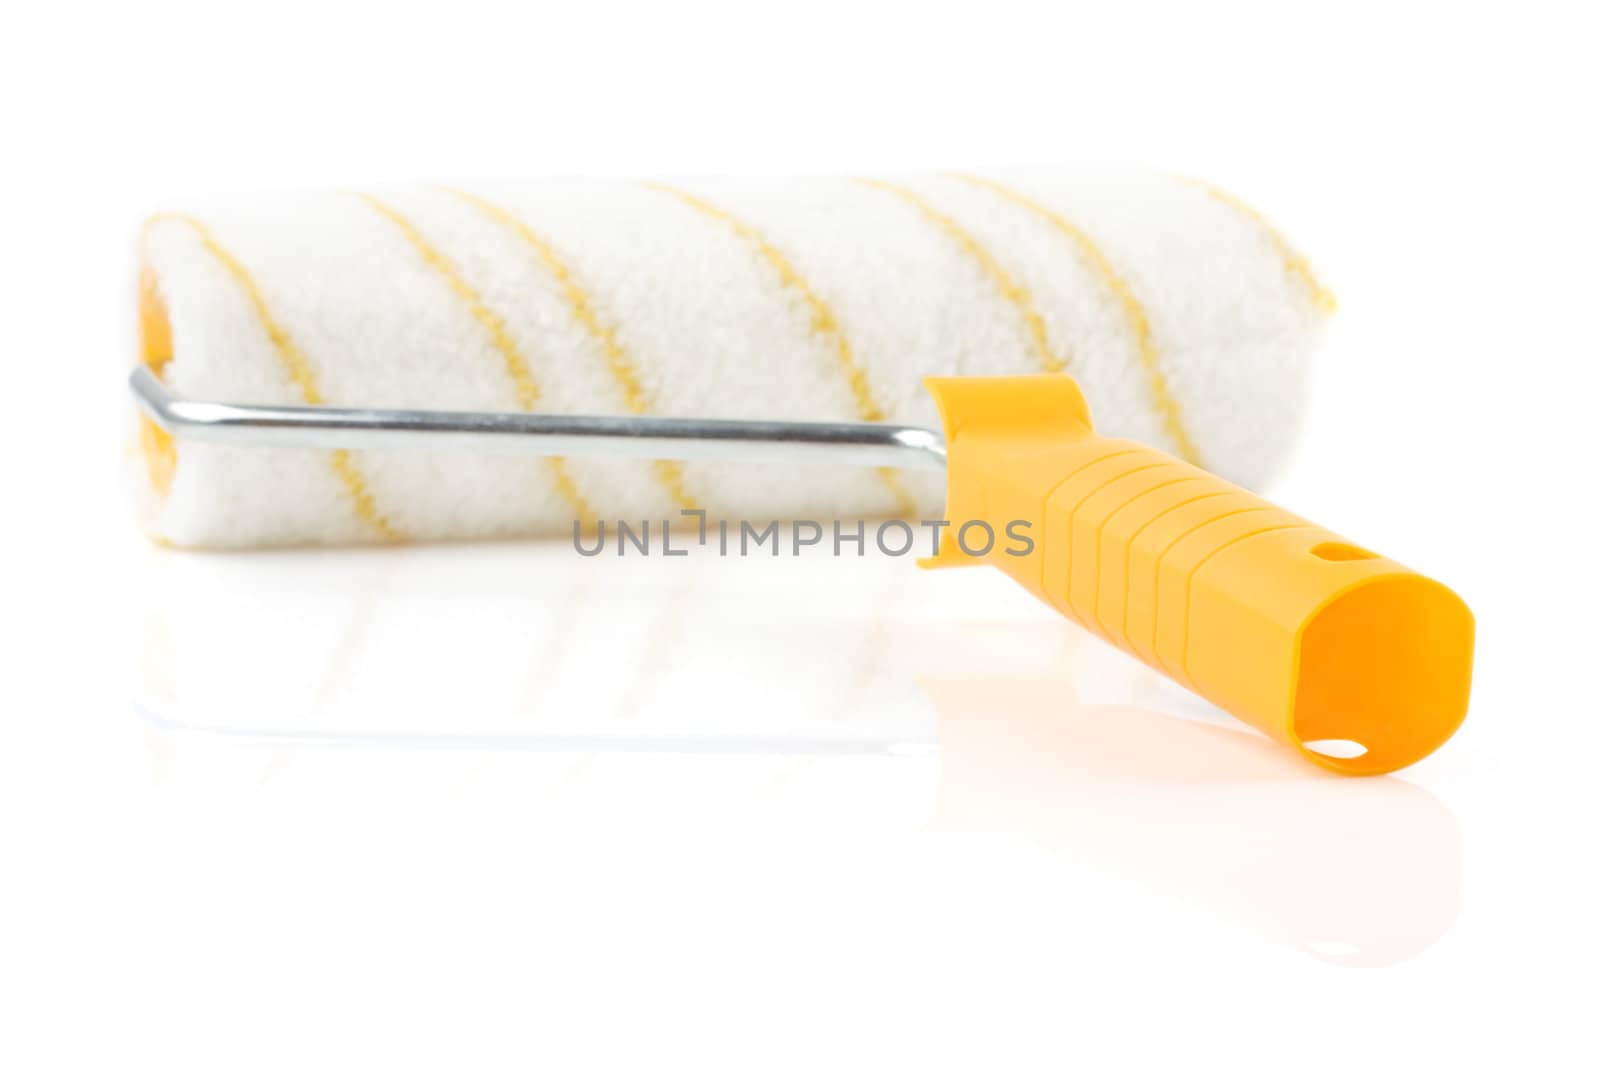 Positive Paint roller over isolated white background